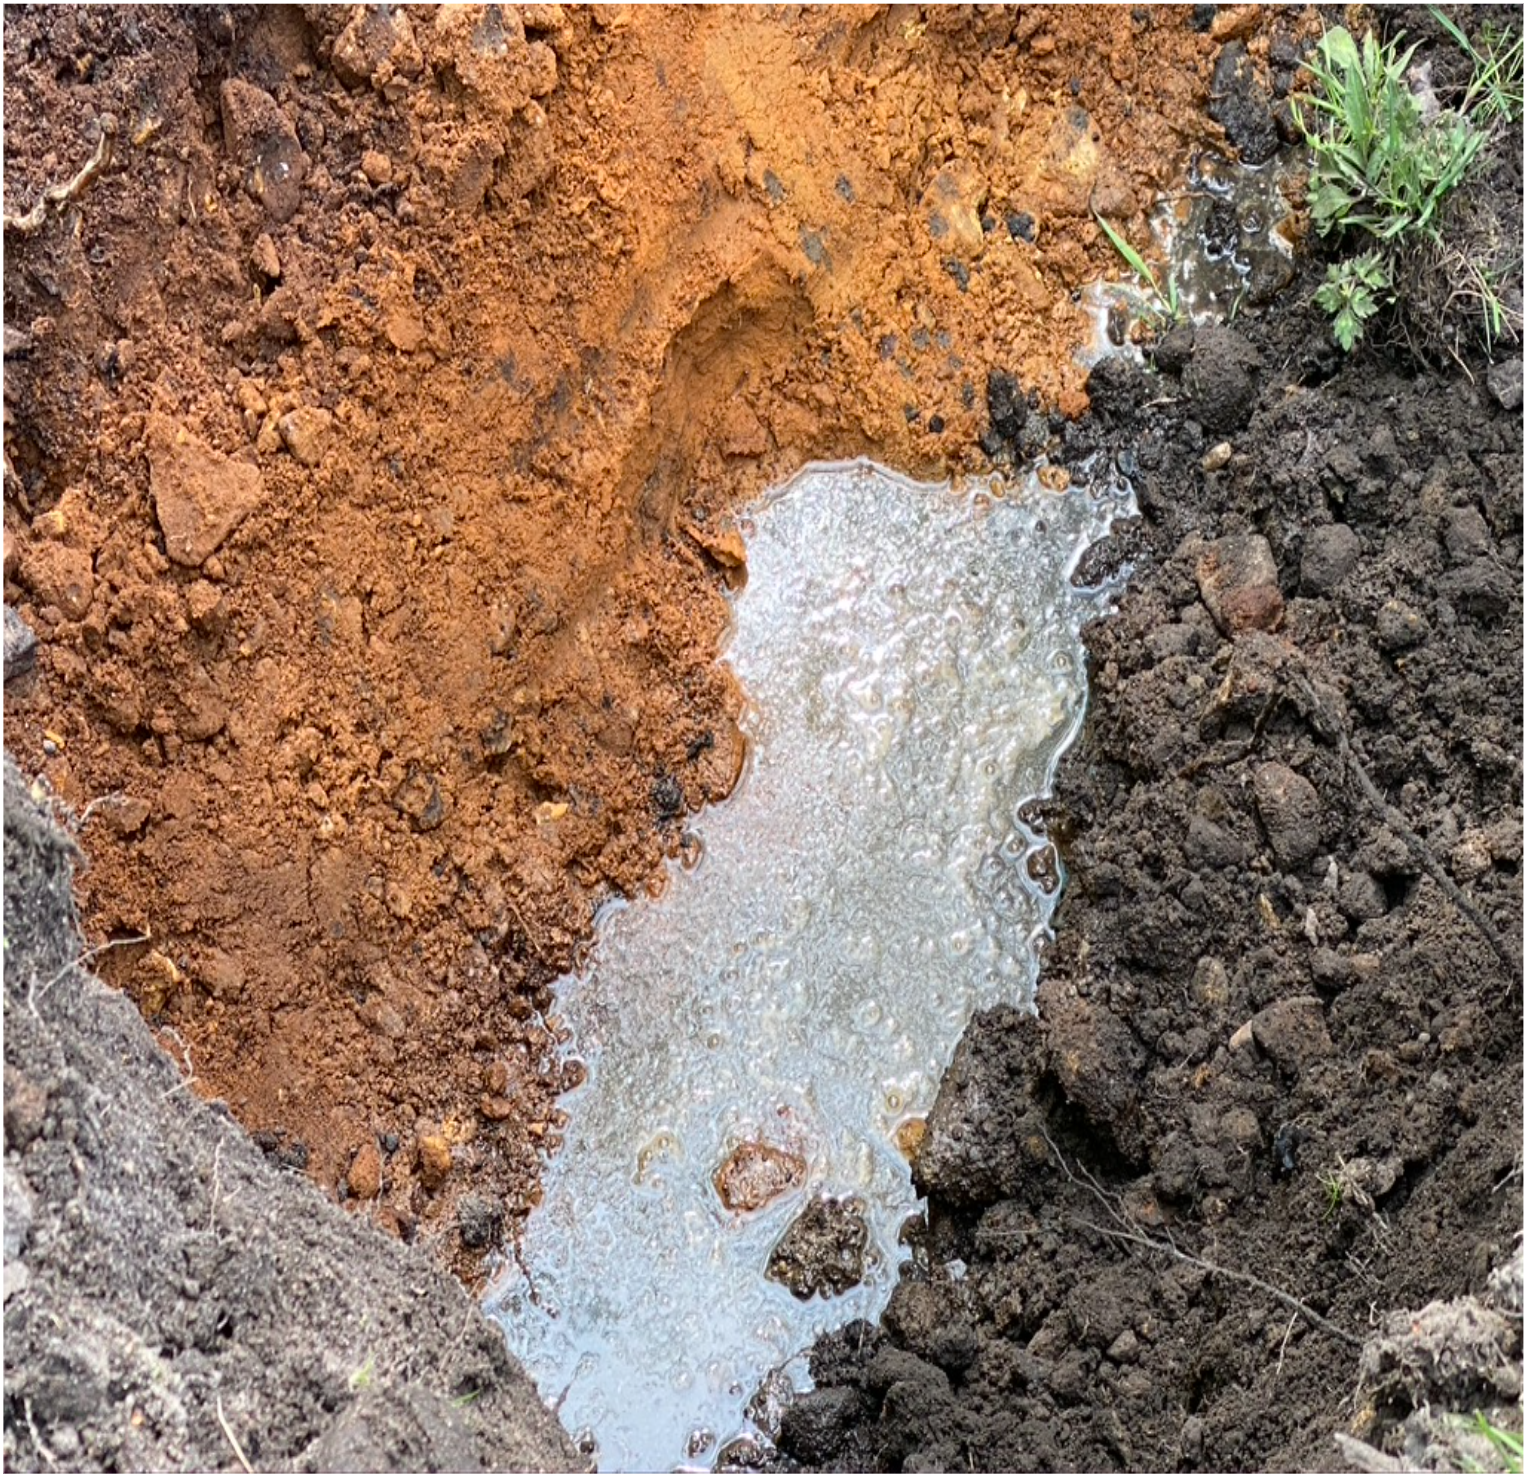 Blackened soil from backed up wastewater.